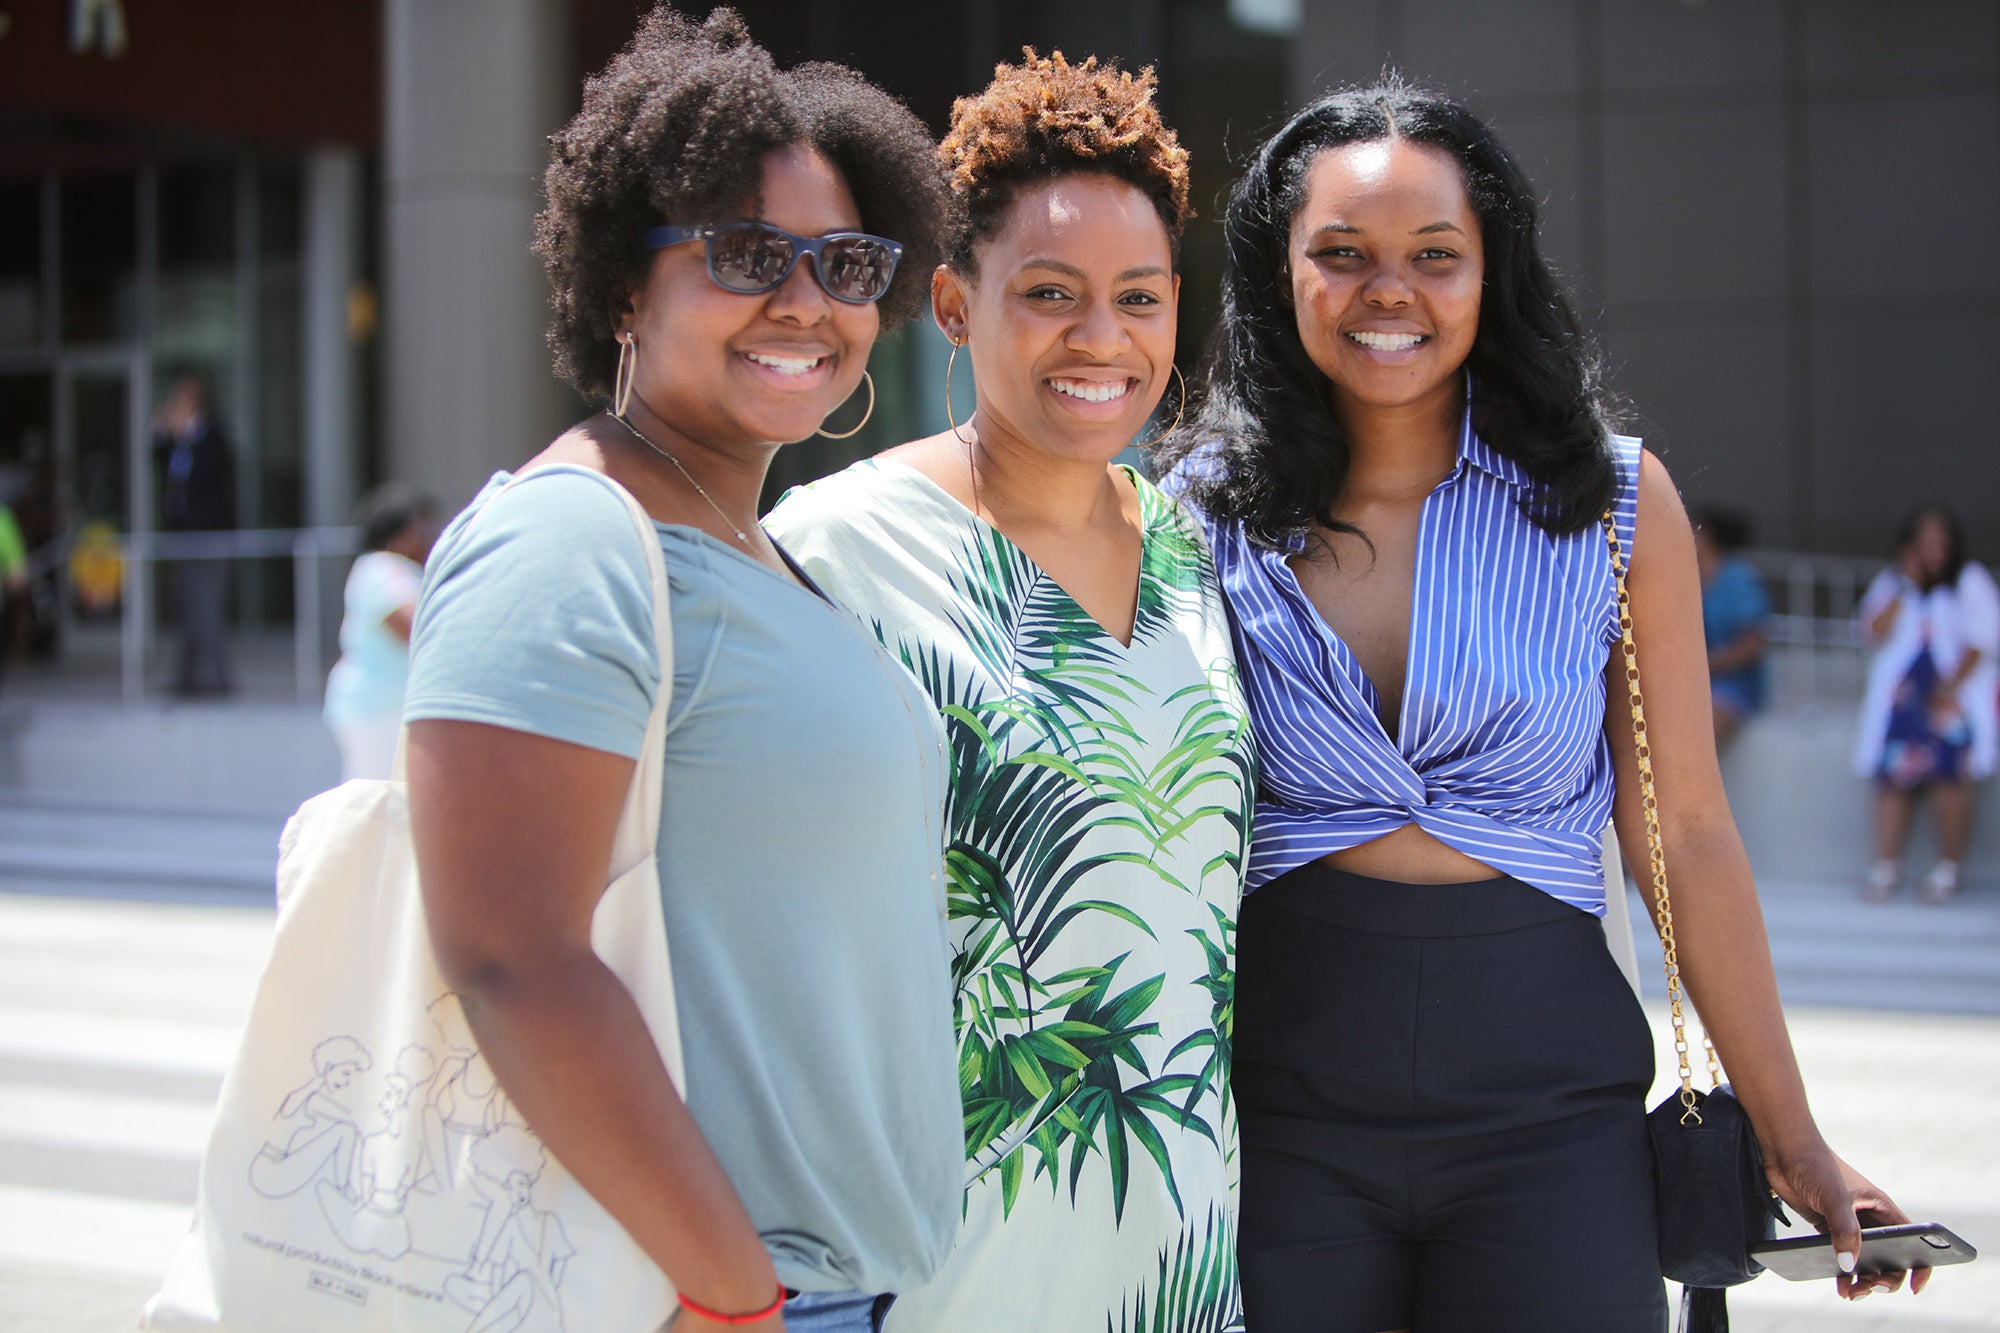 There Was No Shortage of Squad Goals At ESSENCE Fest This Year
